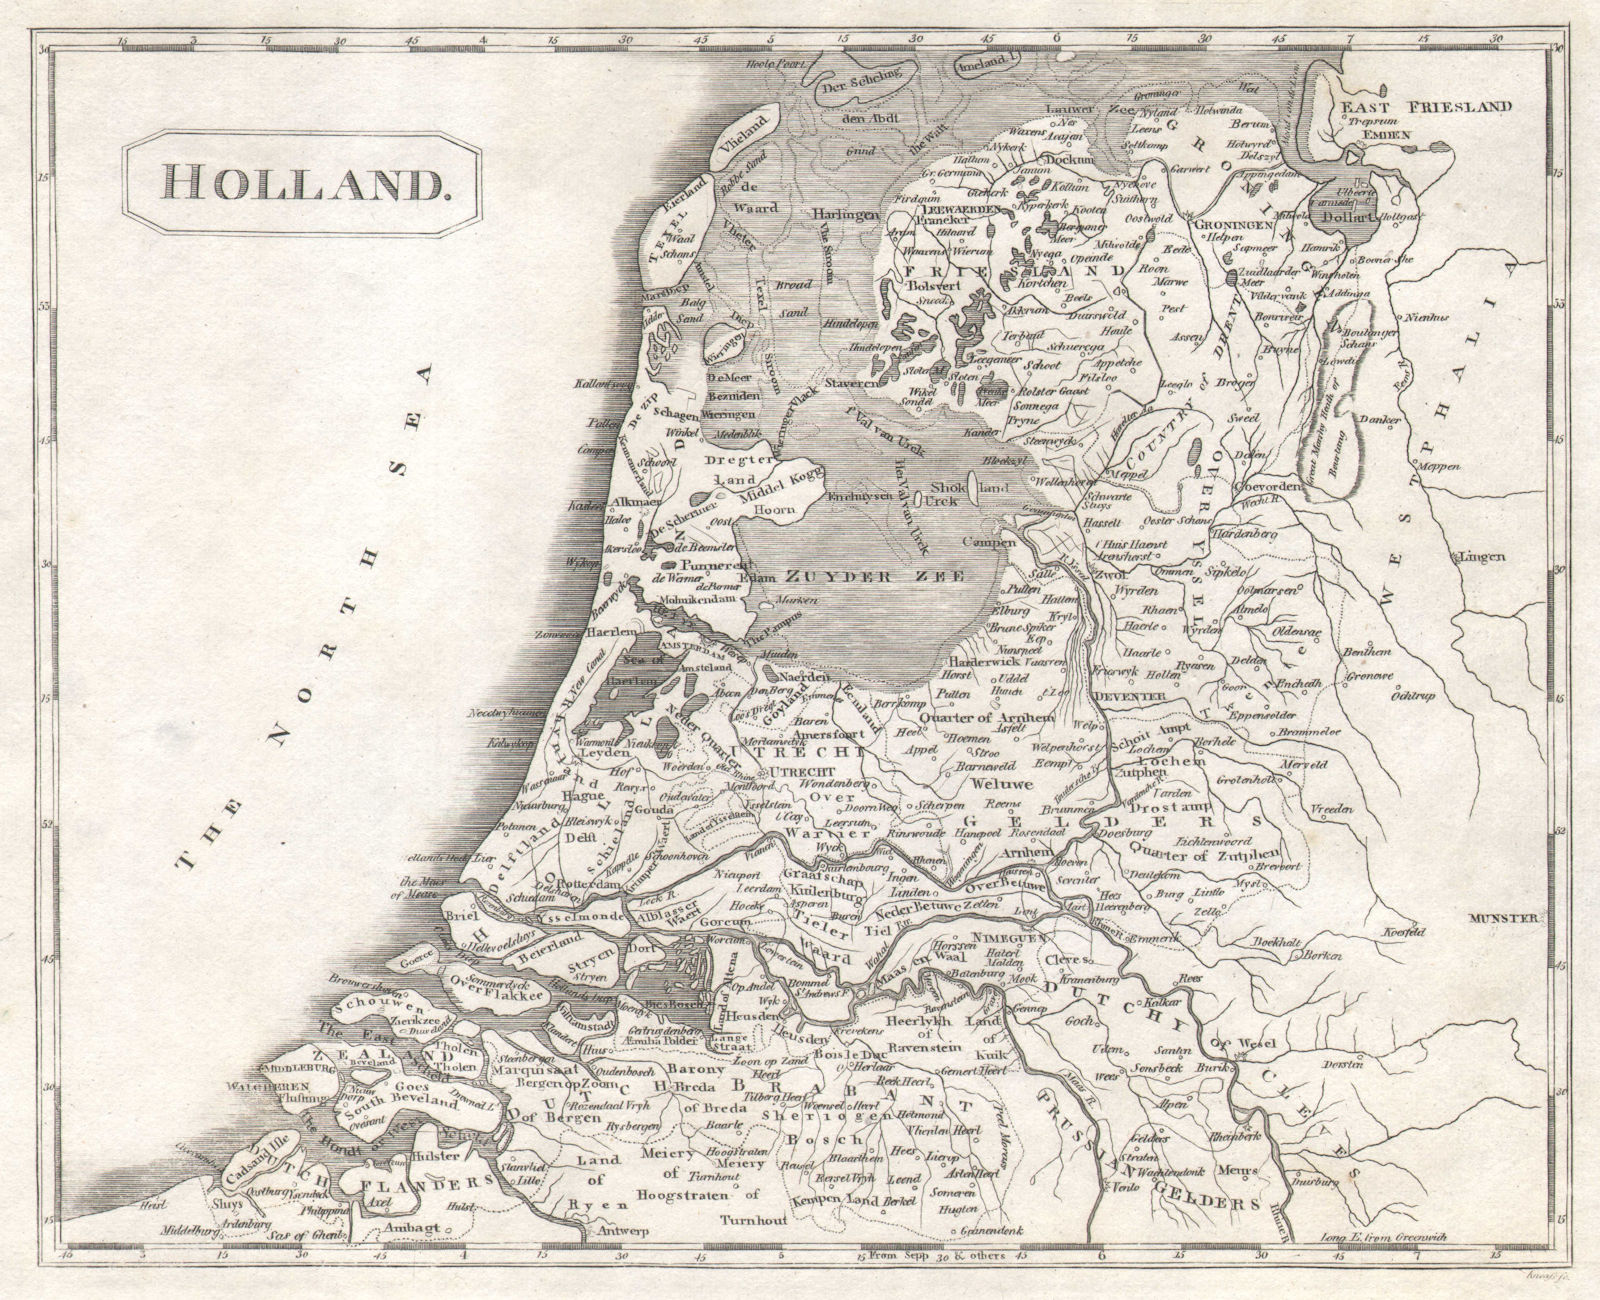 Associate Product Holland by Arrowsmith & Lewis. Netherlands 1812 old antique map plan chart